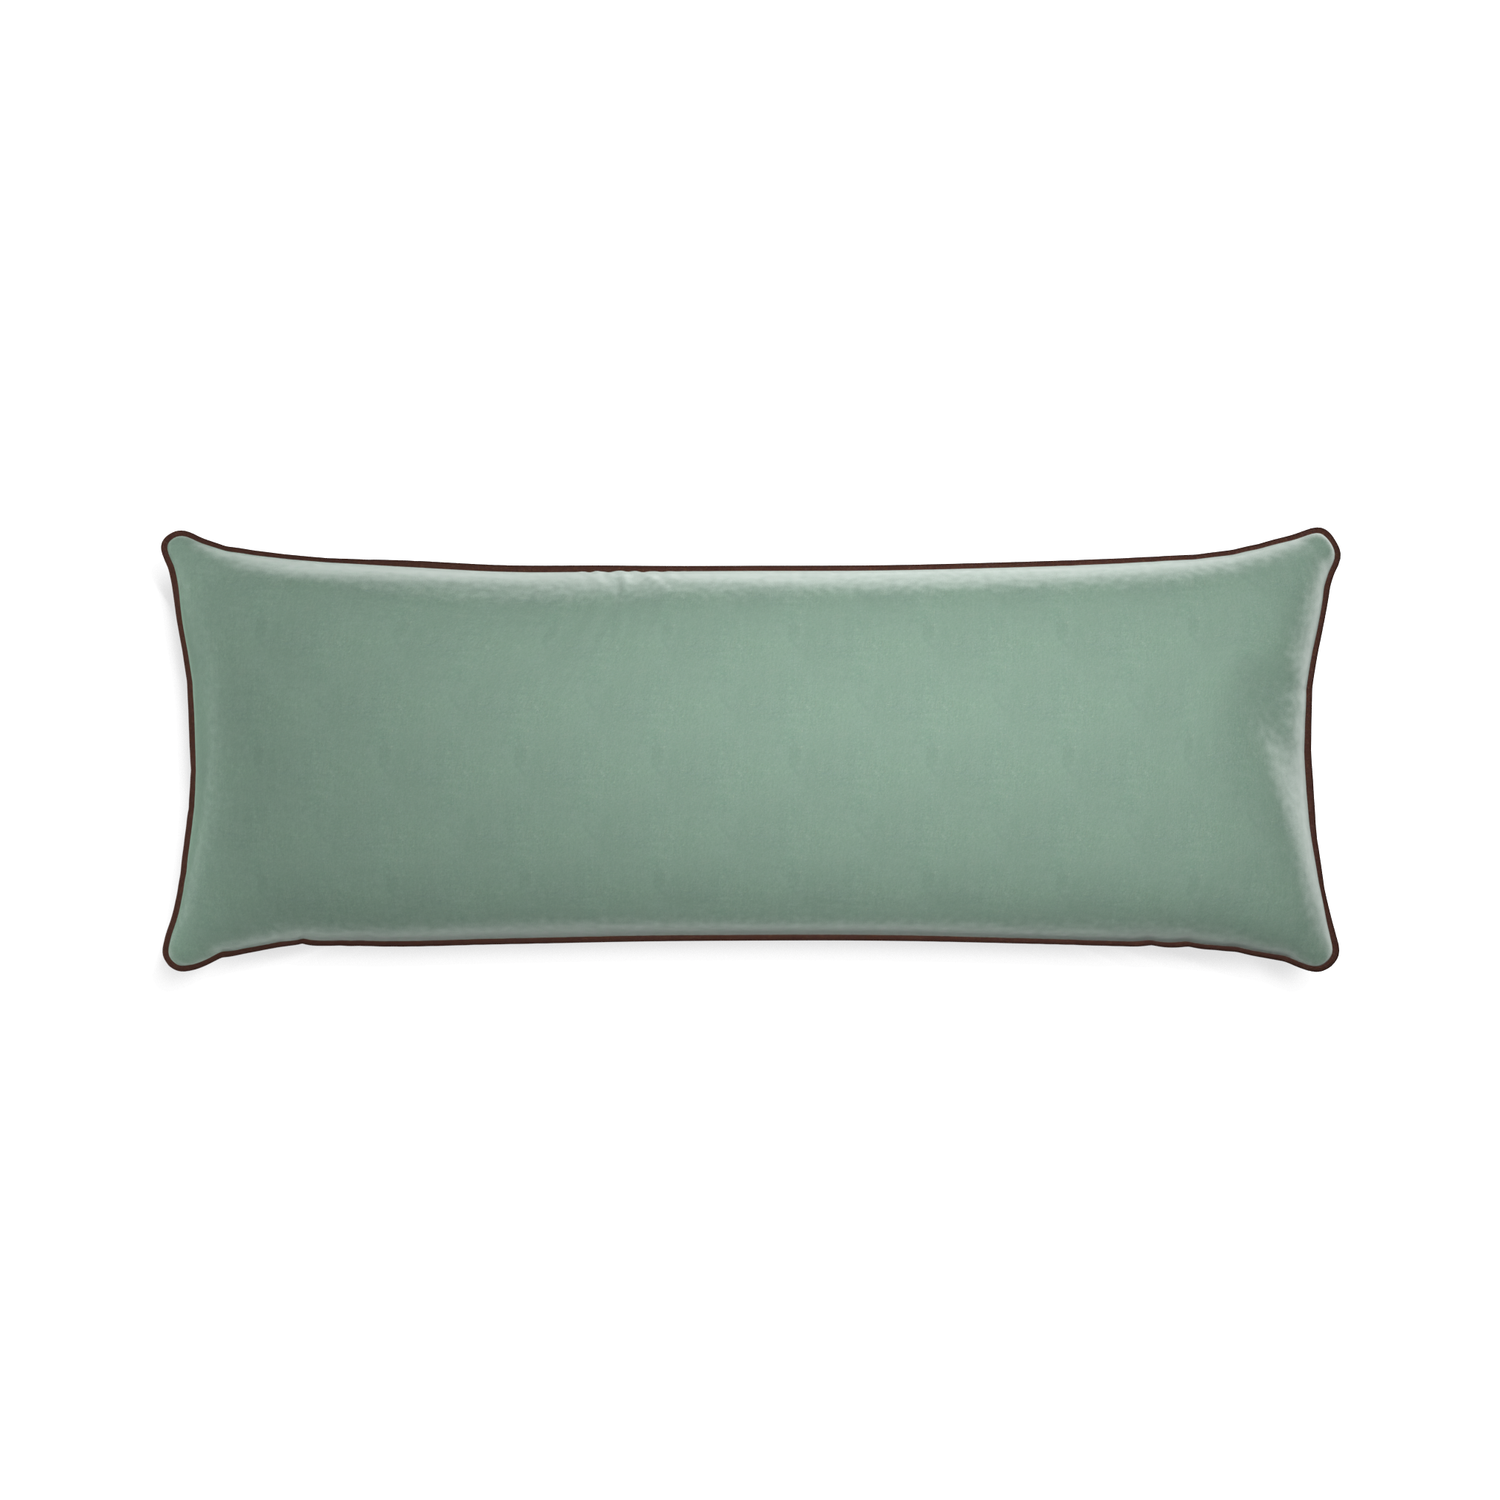 rectangle blue green velvet pillow with brown piping